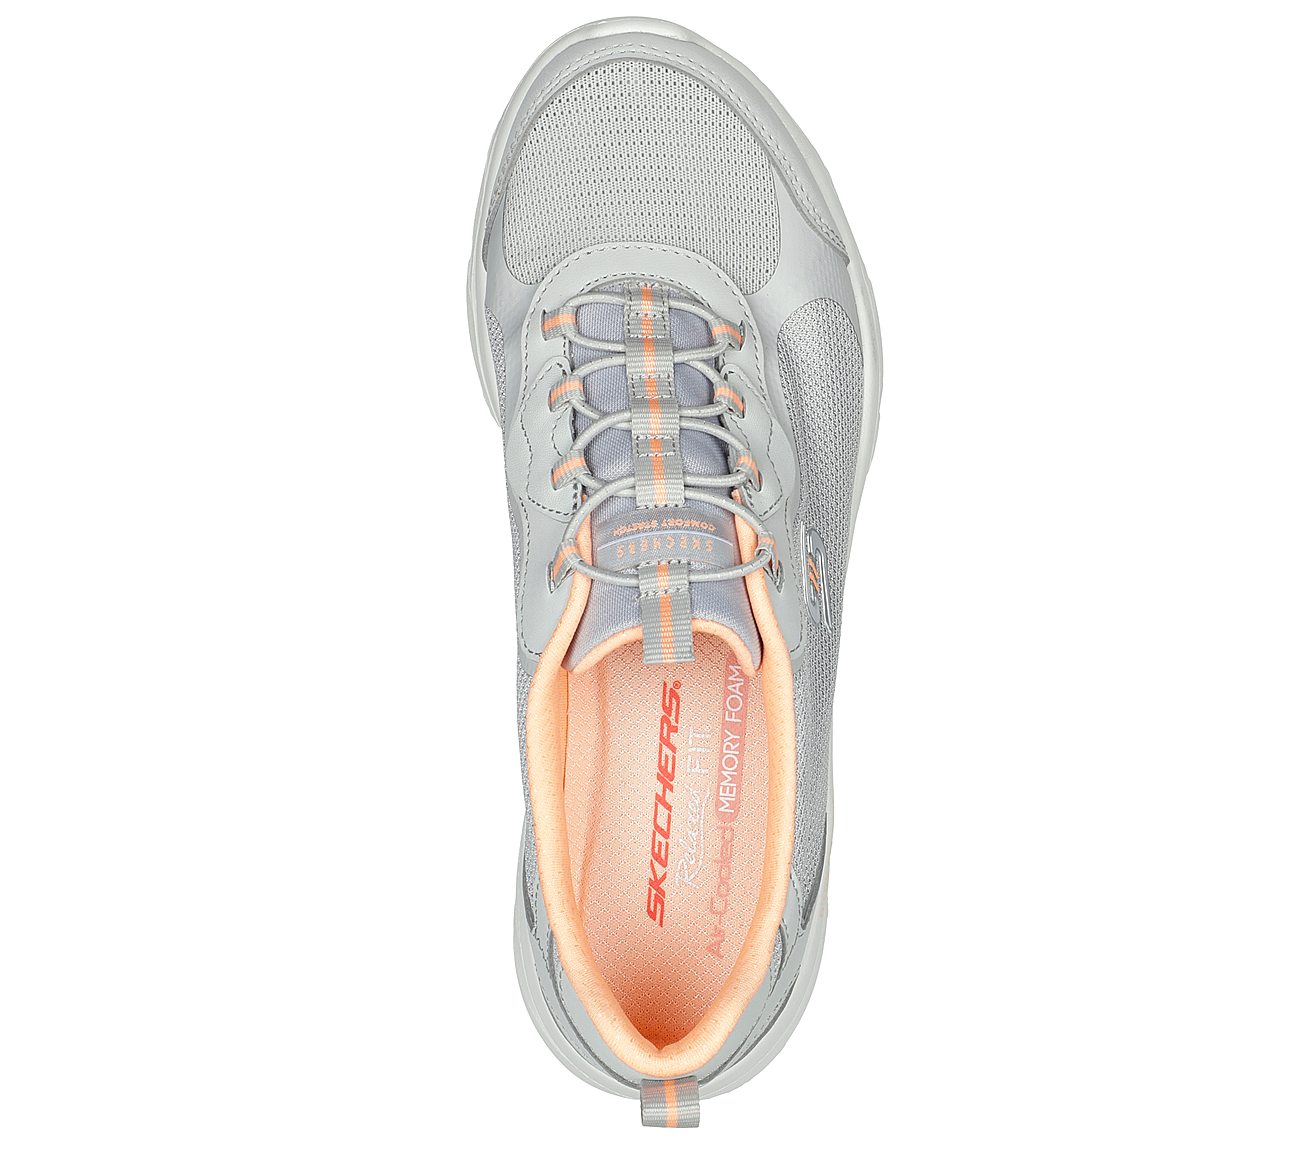 D'LUX COMFORT - BLISS GALORE, GREY/CORAL Footwear Top View